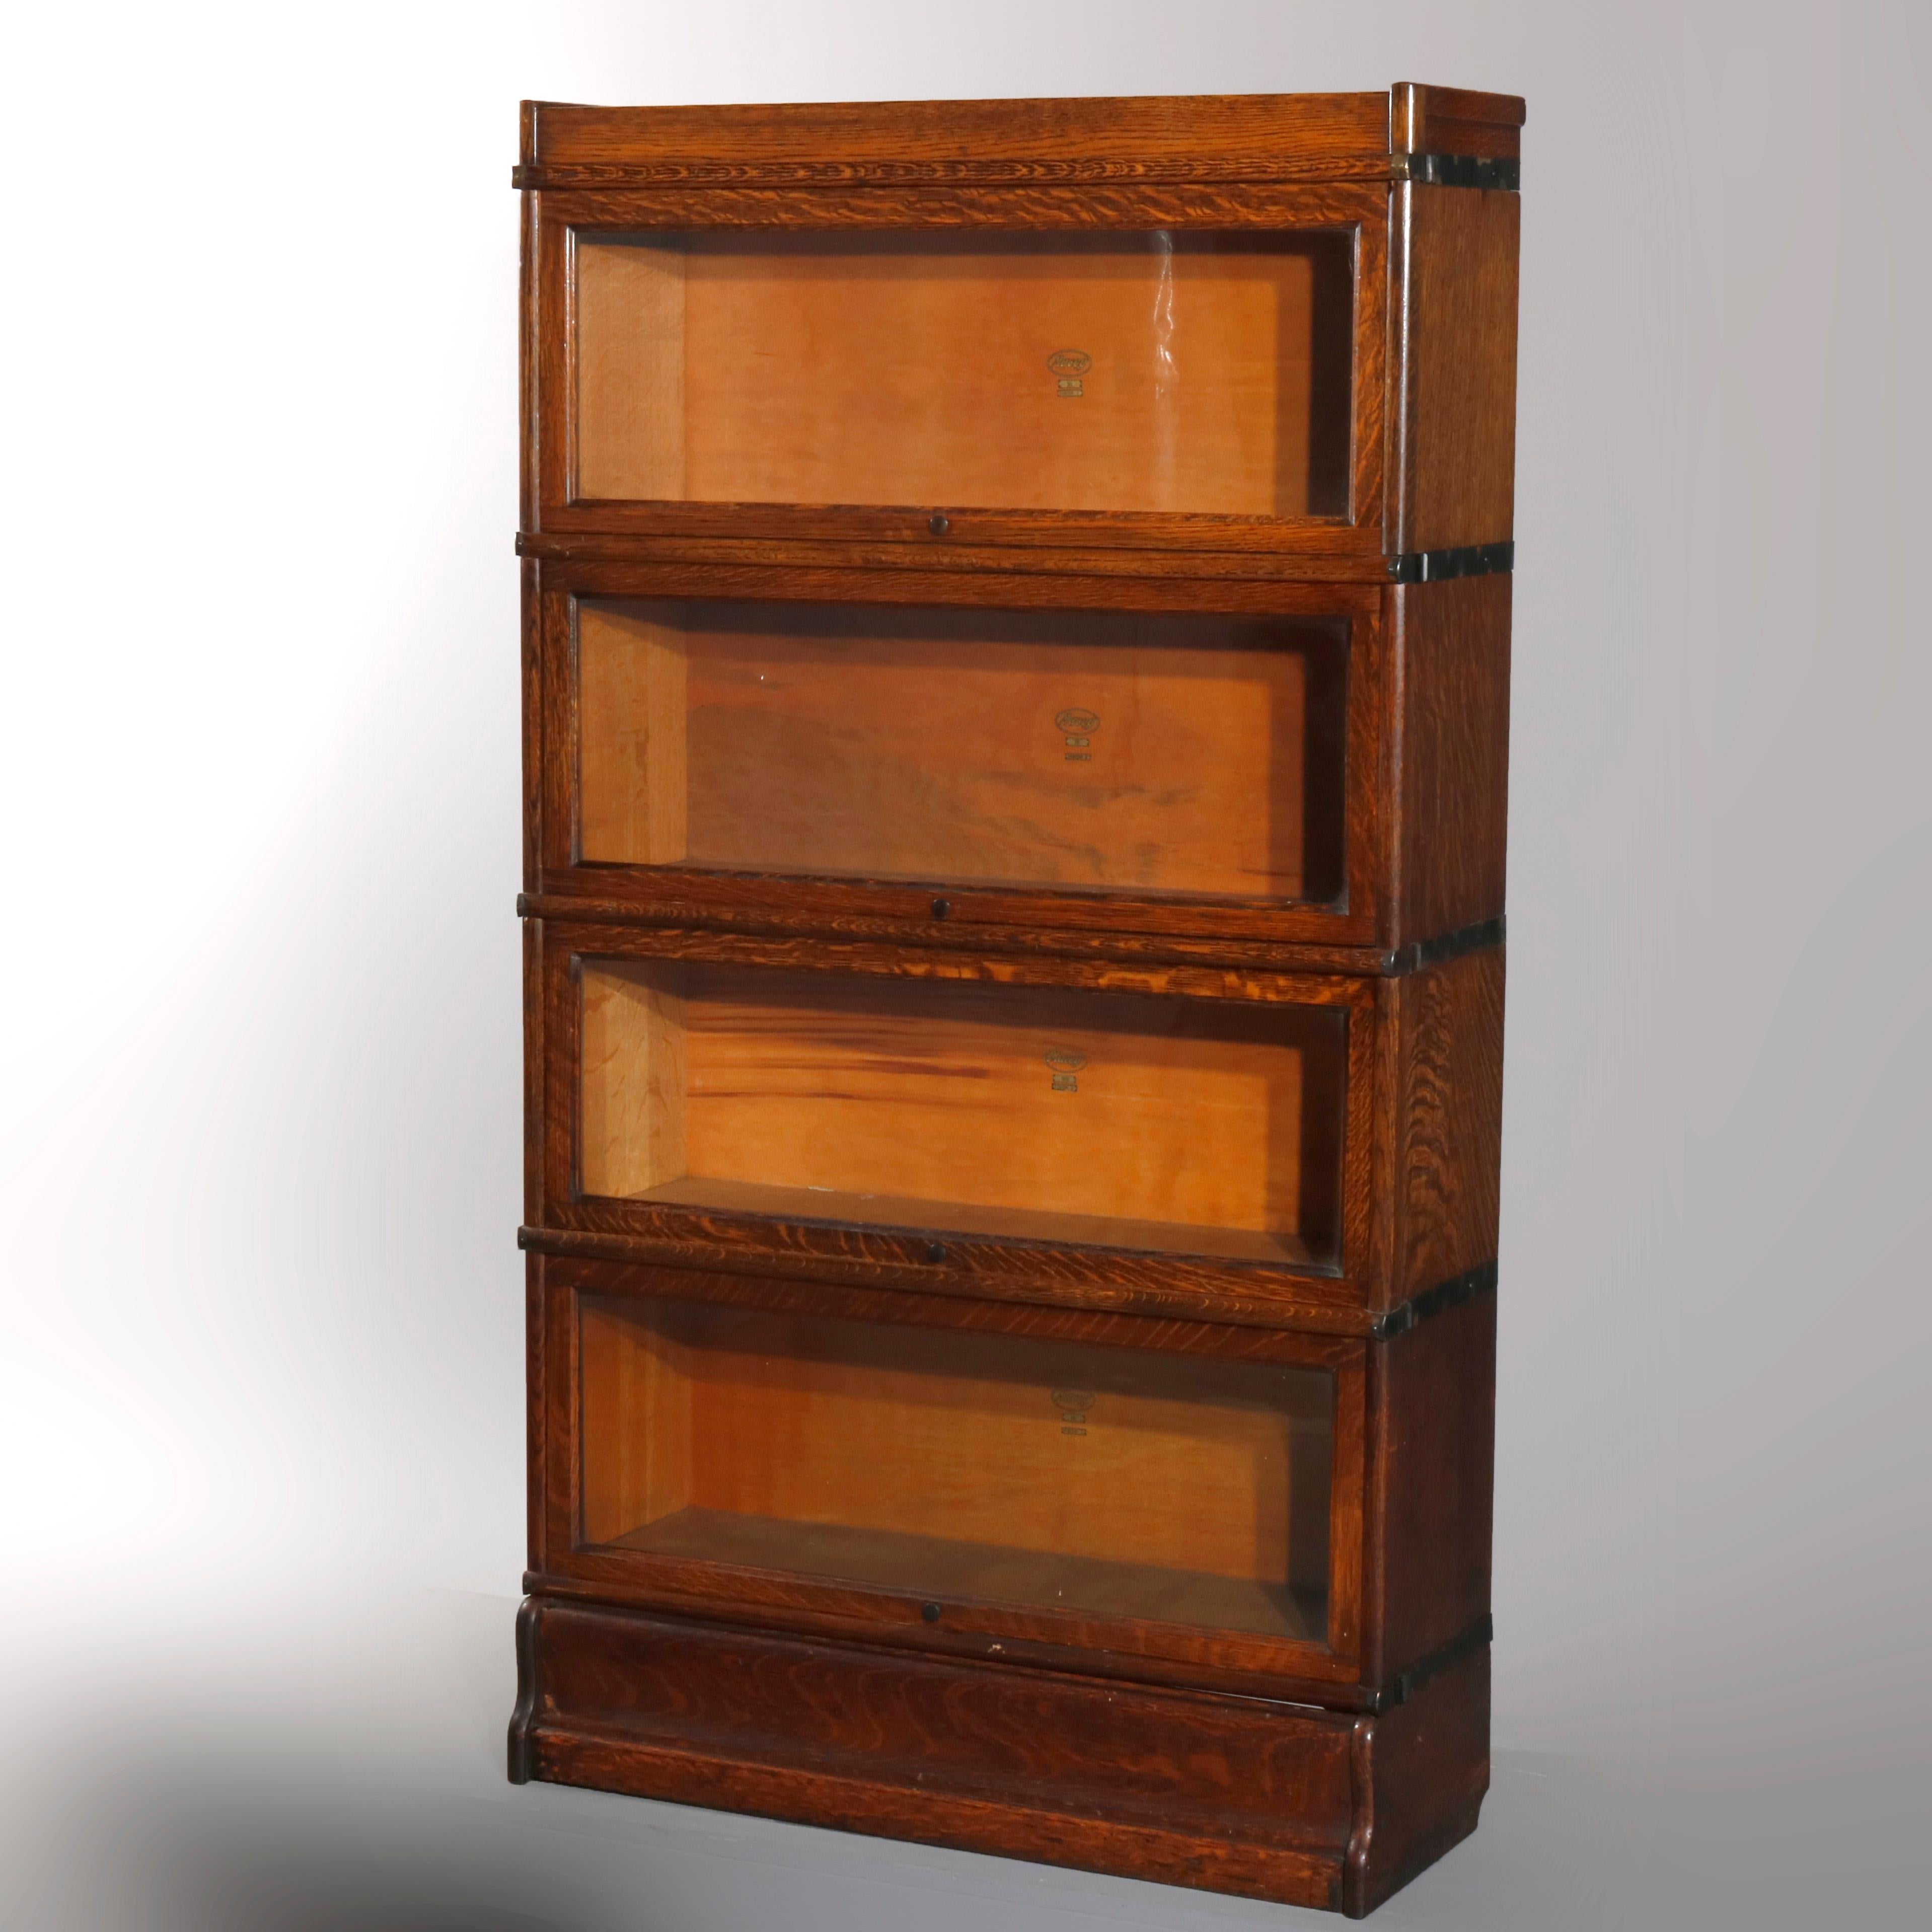 American Antique Arts & Crafts Style Oak 4 Stack Barrister Bookcase by Macey, circa 1910